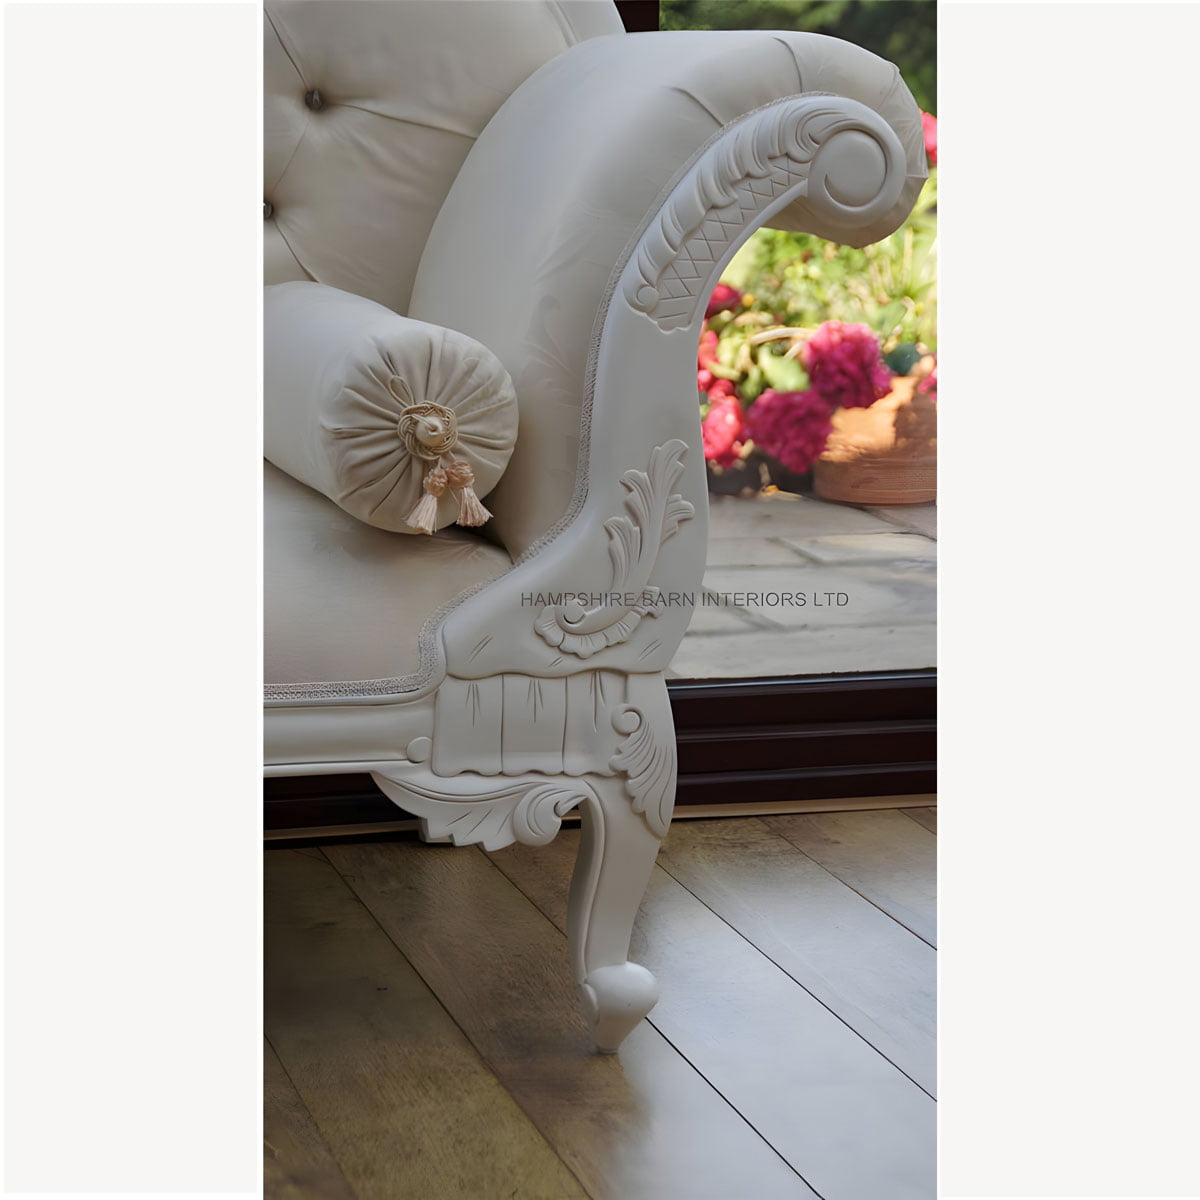 Antique White Ornate Medium Hampshire Chaise With Ivory Cream Fabric With Crystal Buttoning 4 - Hampshire Barn Interiors - Antique White Ornate Medium Hampshire Chaise With Ivory Cream Fabric With Crystal Buttoning -